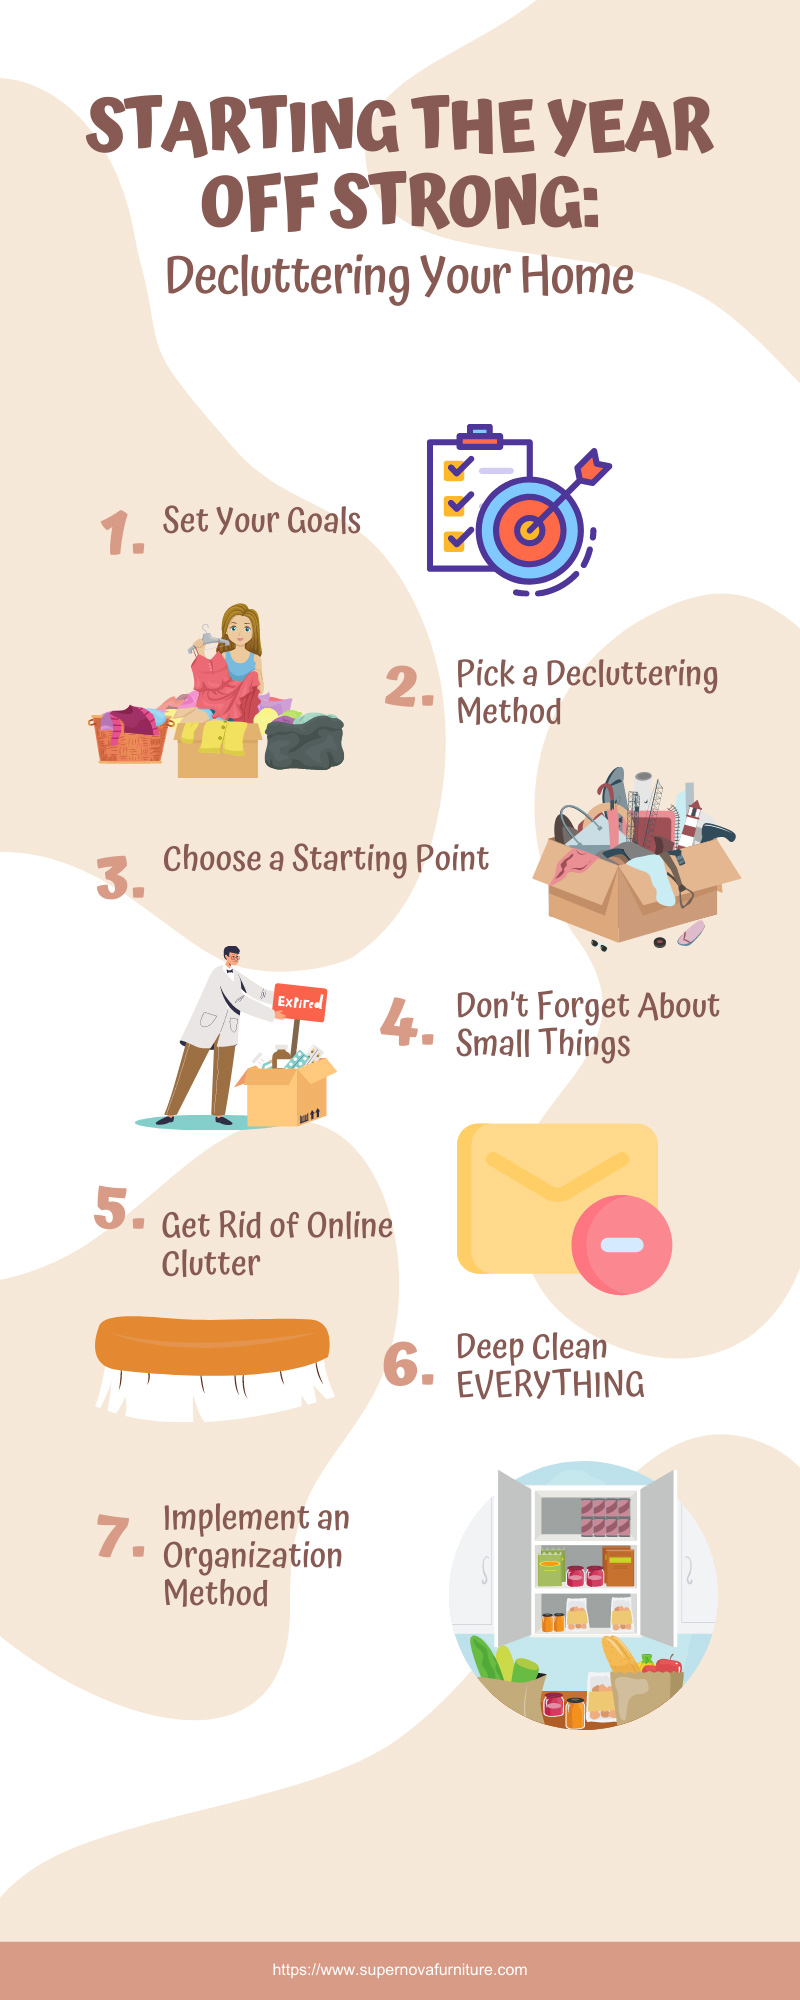 Starting the Year Off Strong: Decluttering Your Home